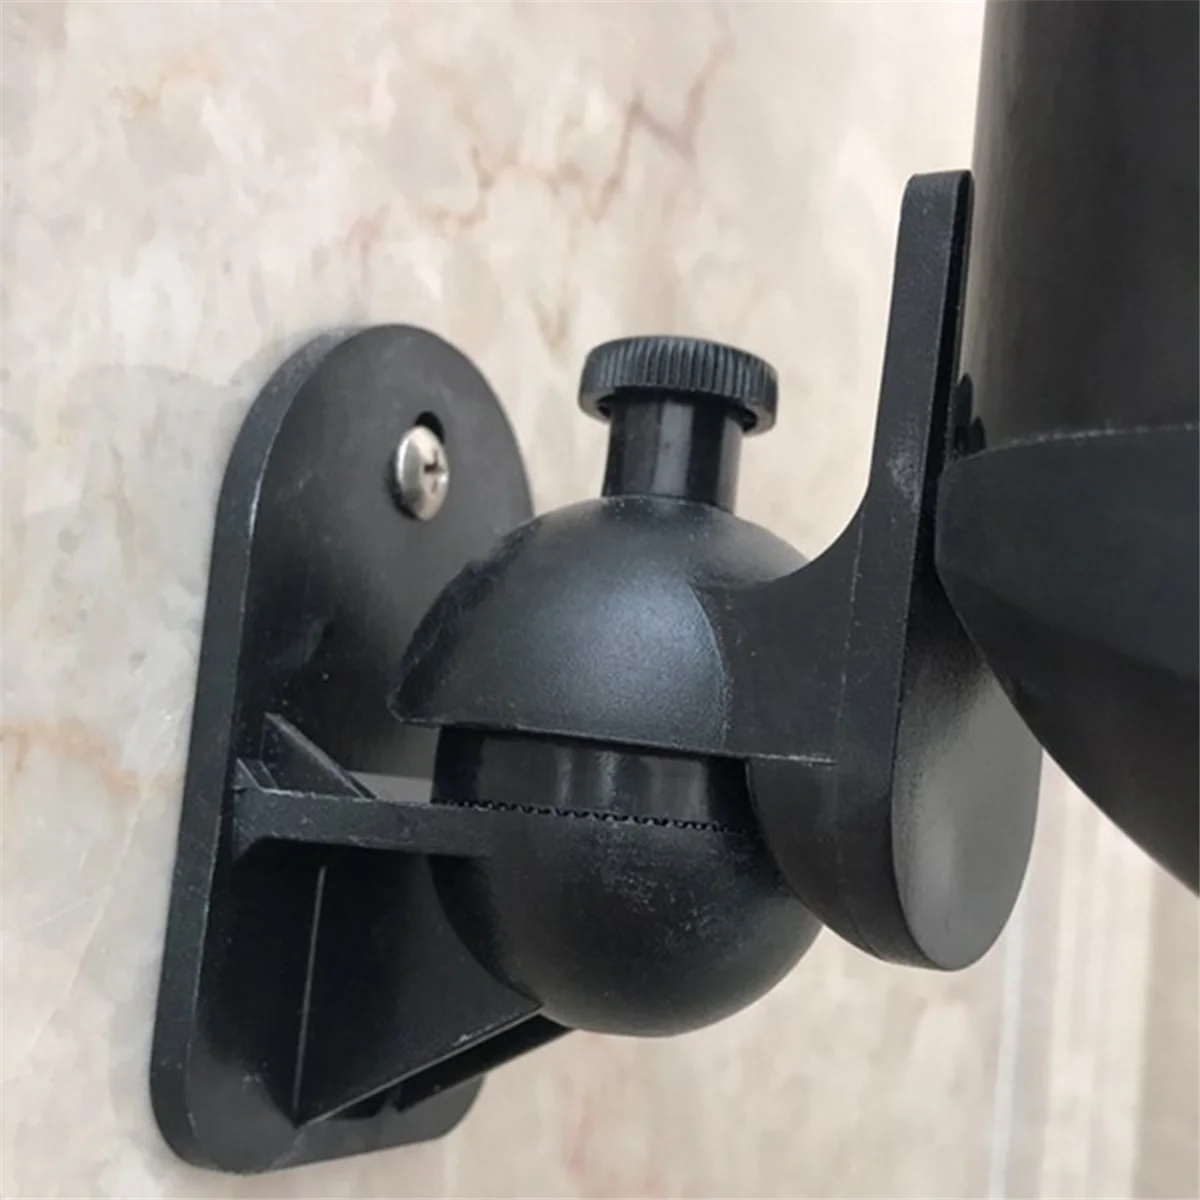 Universal Speaker Wall Mount Bracket Ceiling Stand Clamp with Adjustable Swivel and Tilt Angle Rotation